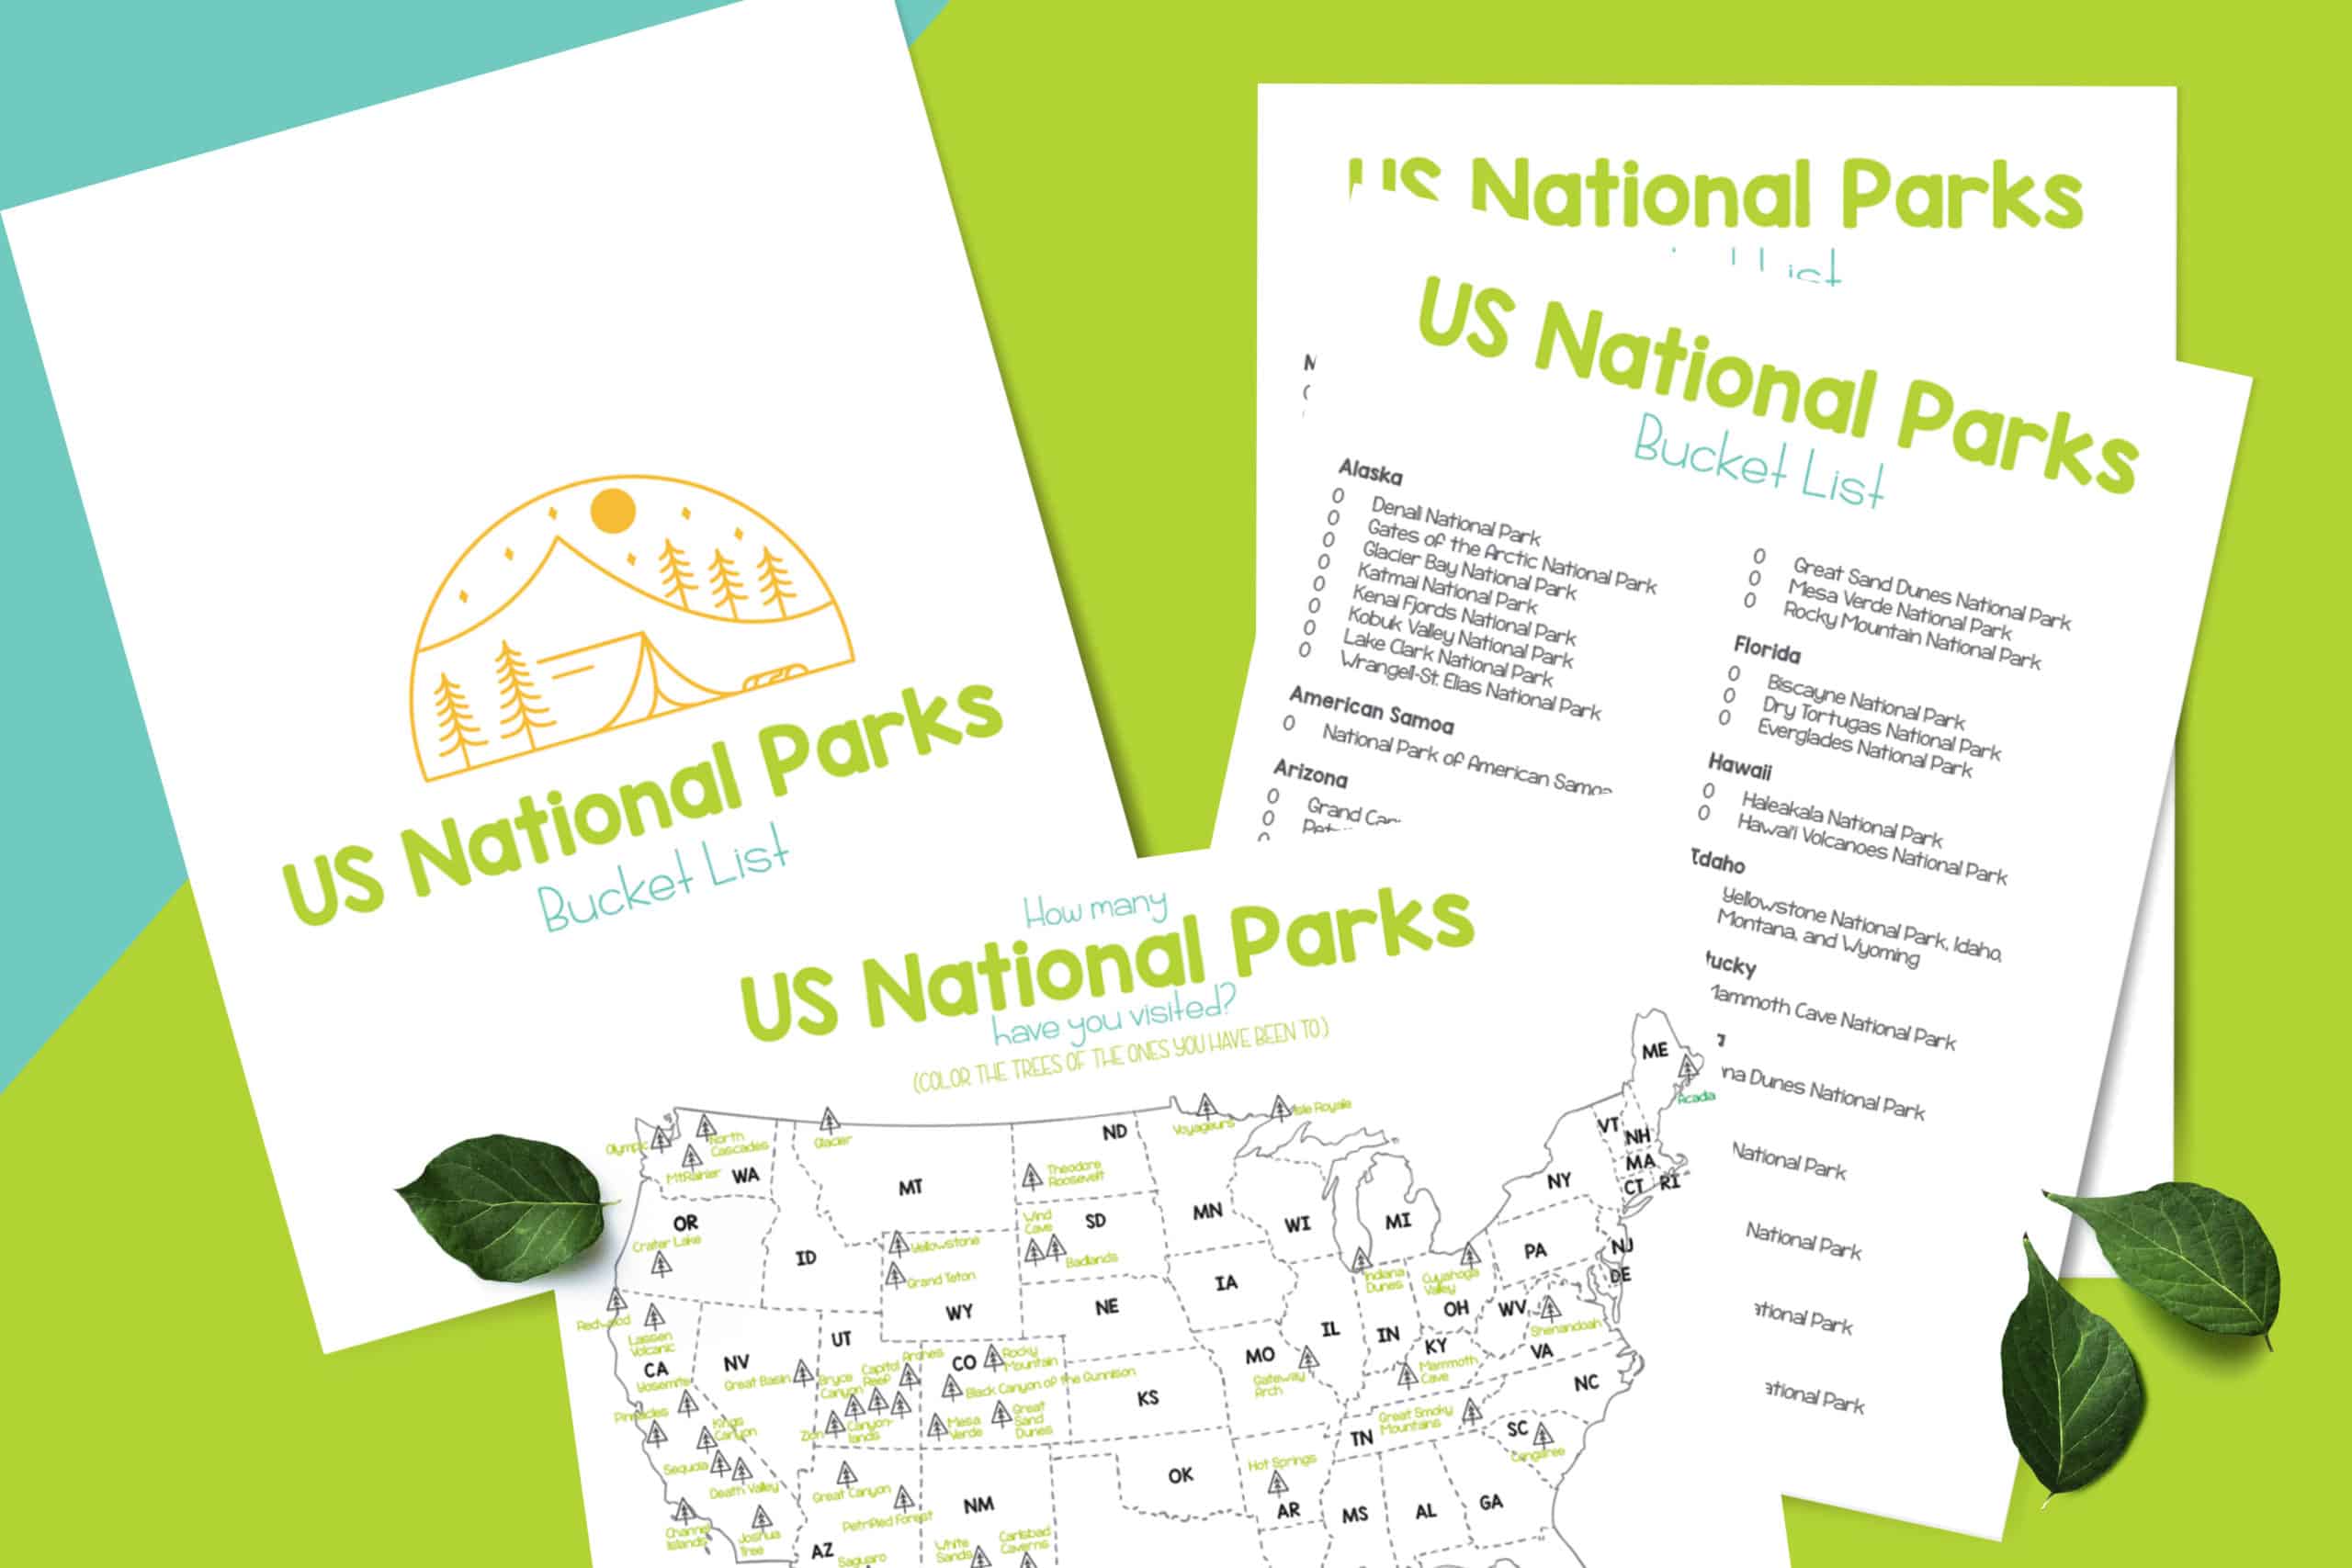 This list of National Parks to visit just made vacation planning SO MUCH EASIER! I love the checklist and visual map! 